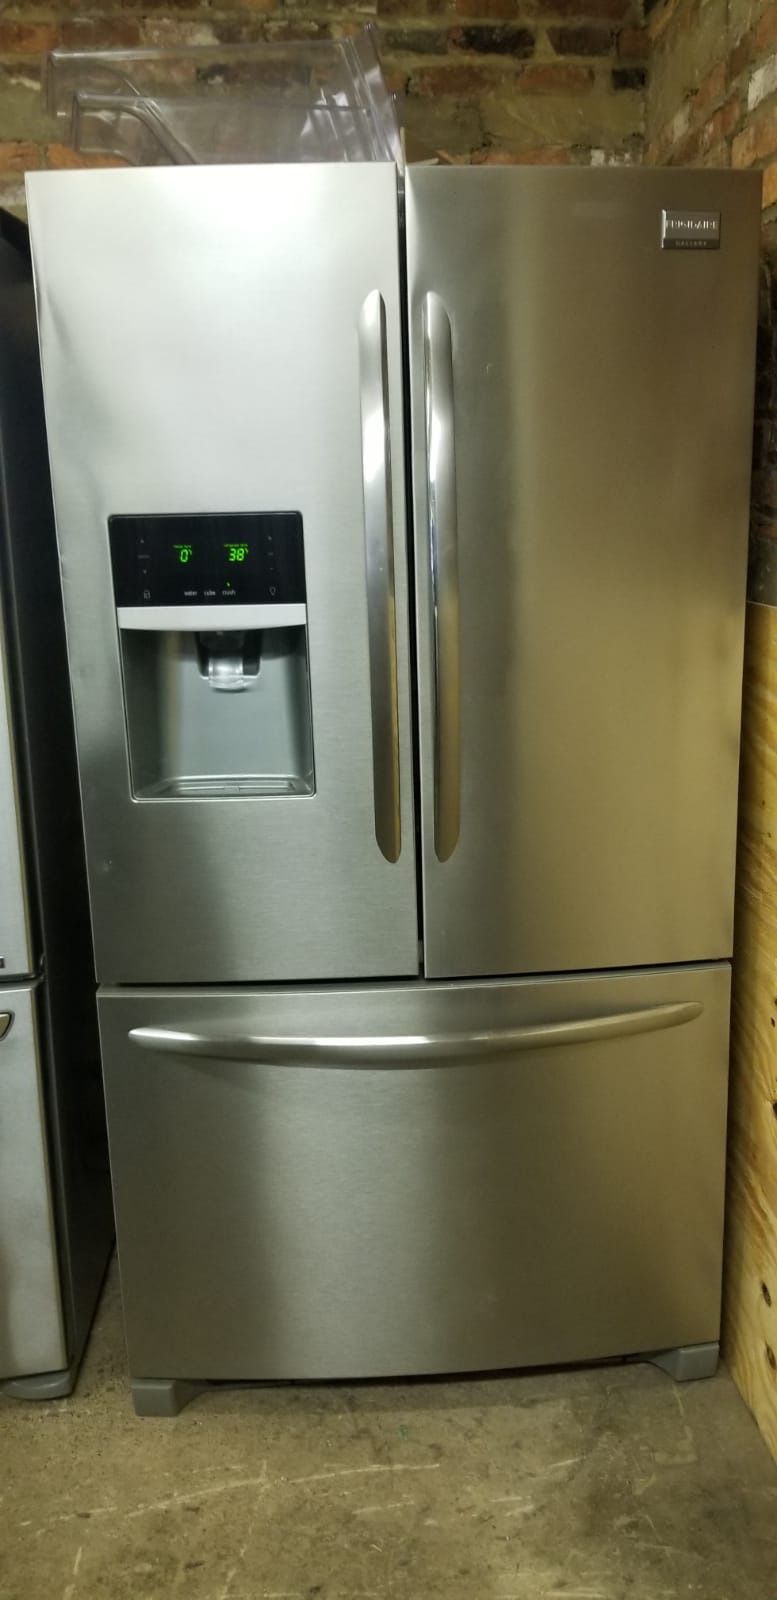 Frigidaire 36” inches wide bottom freezer ice maker and water line in excellent working conditions 90 days warranty included